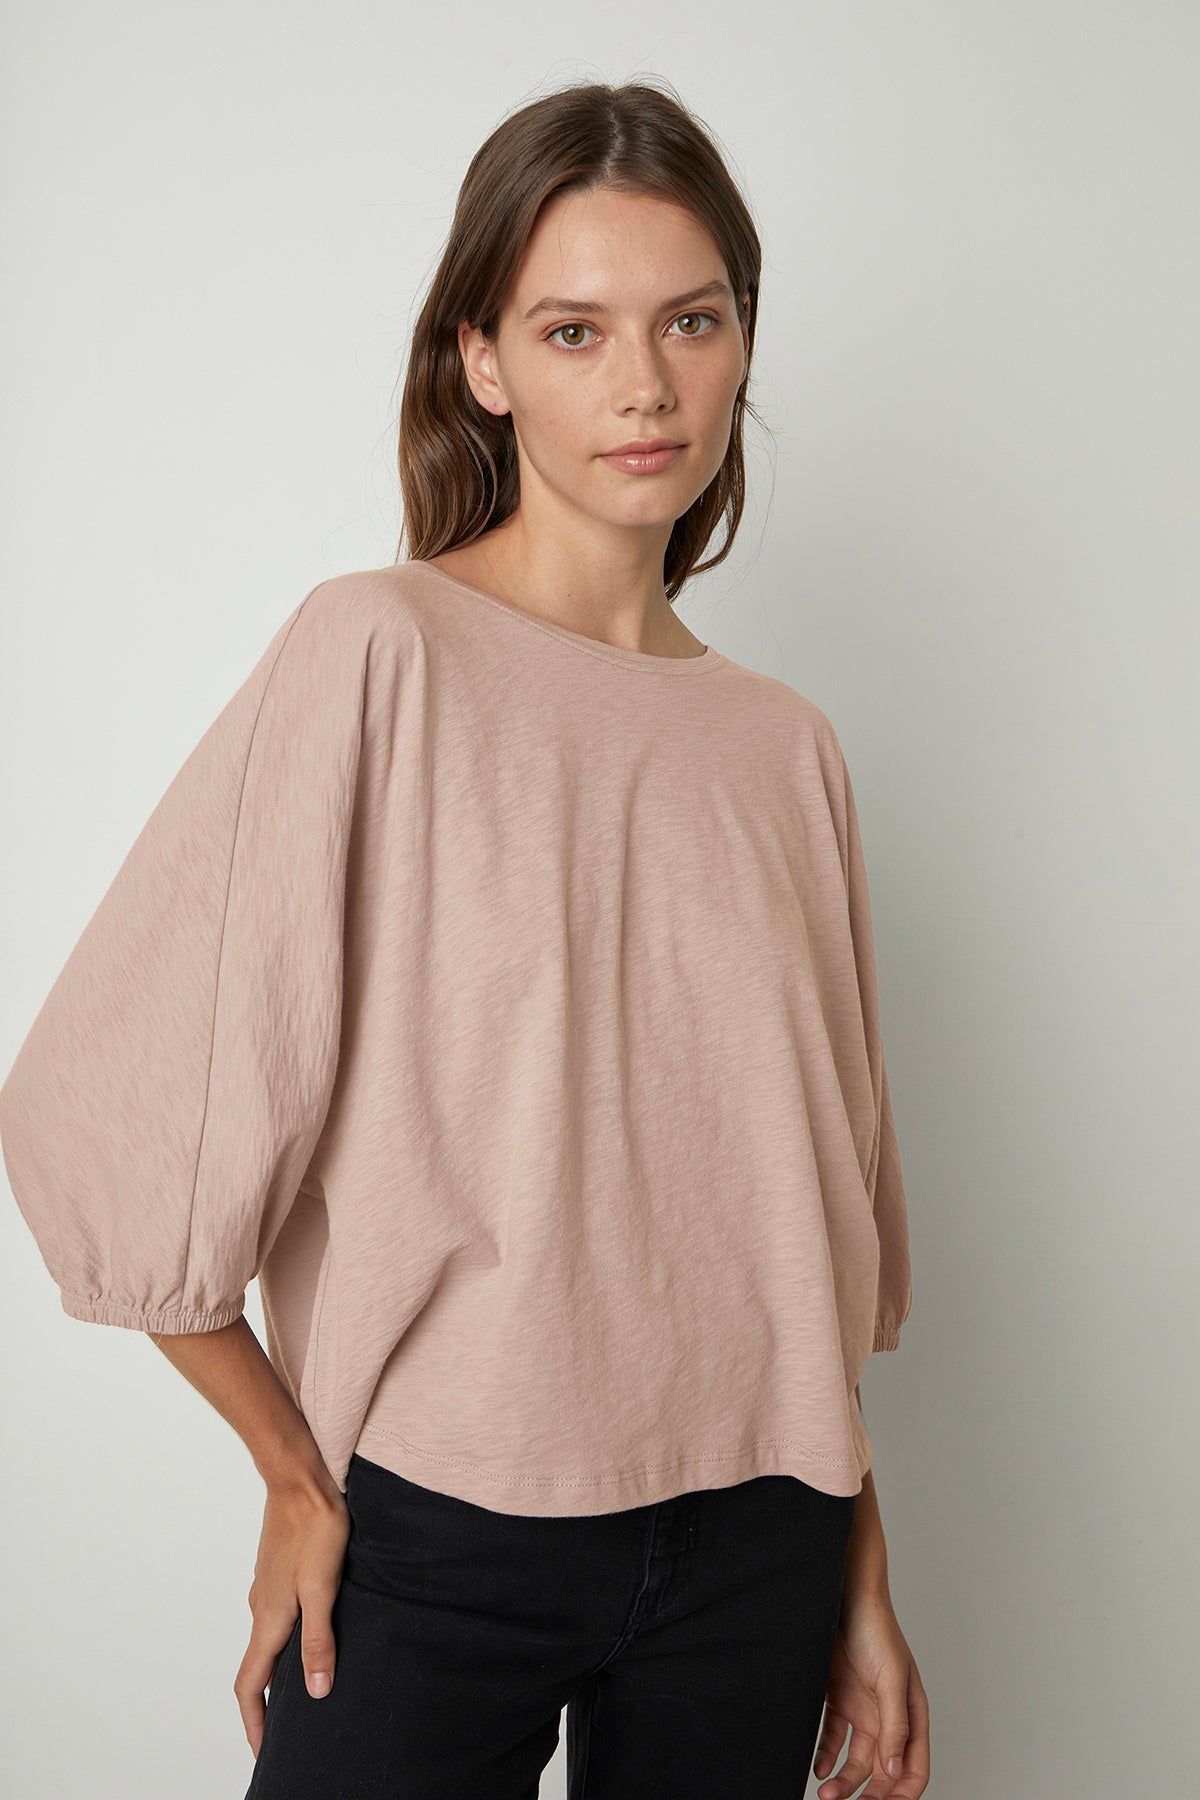 Corry Puff Sleeve Tee in rosegold with Victoria denim in noir black front-25807848276161